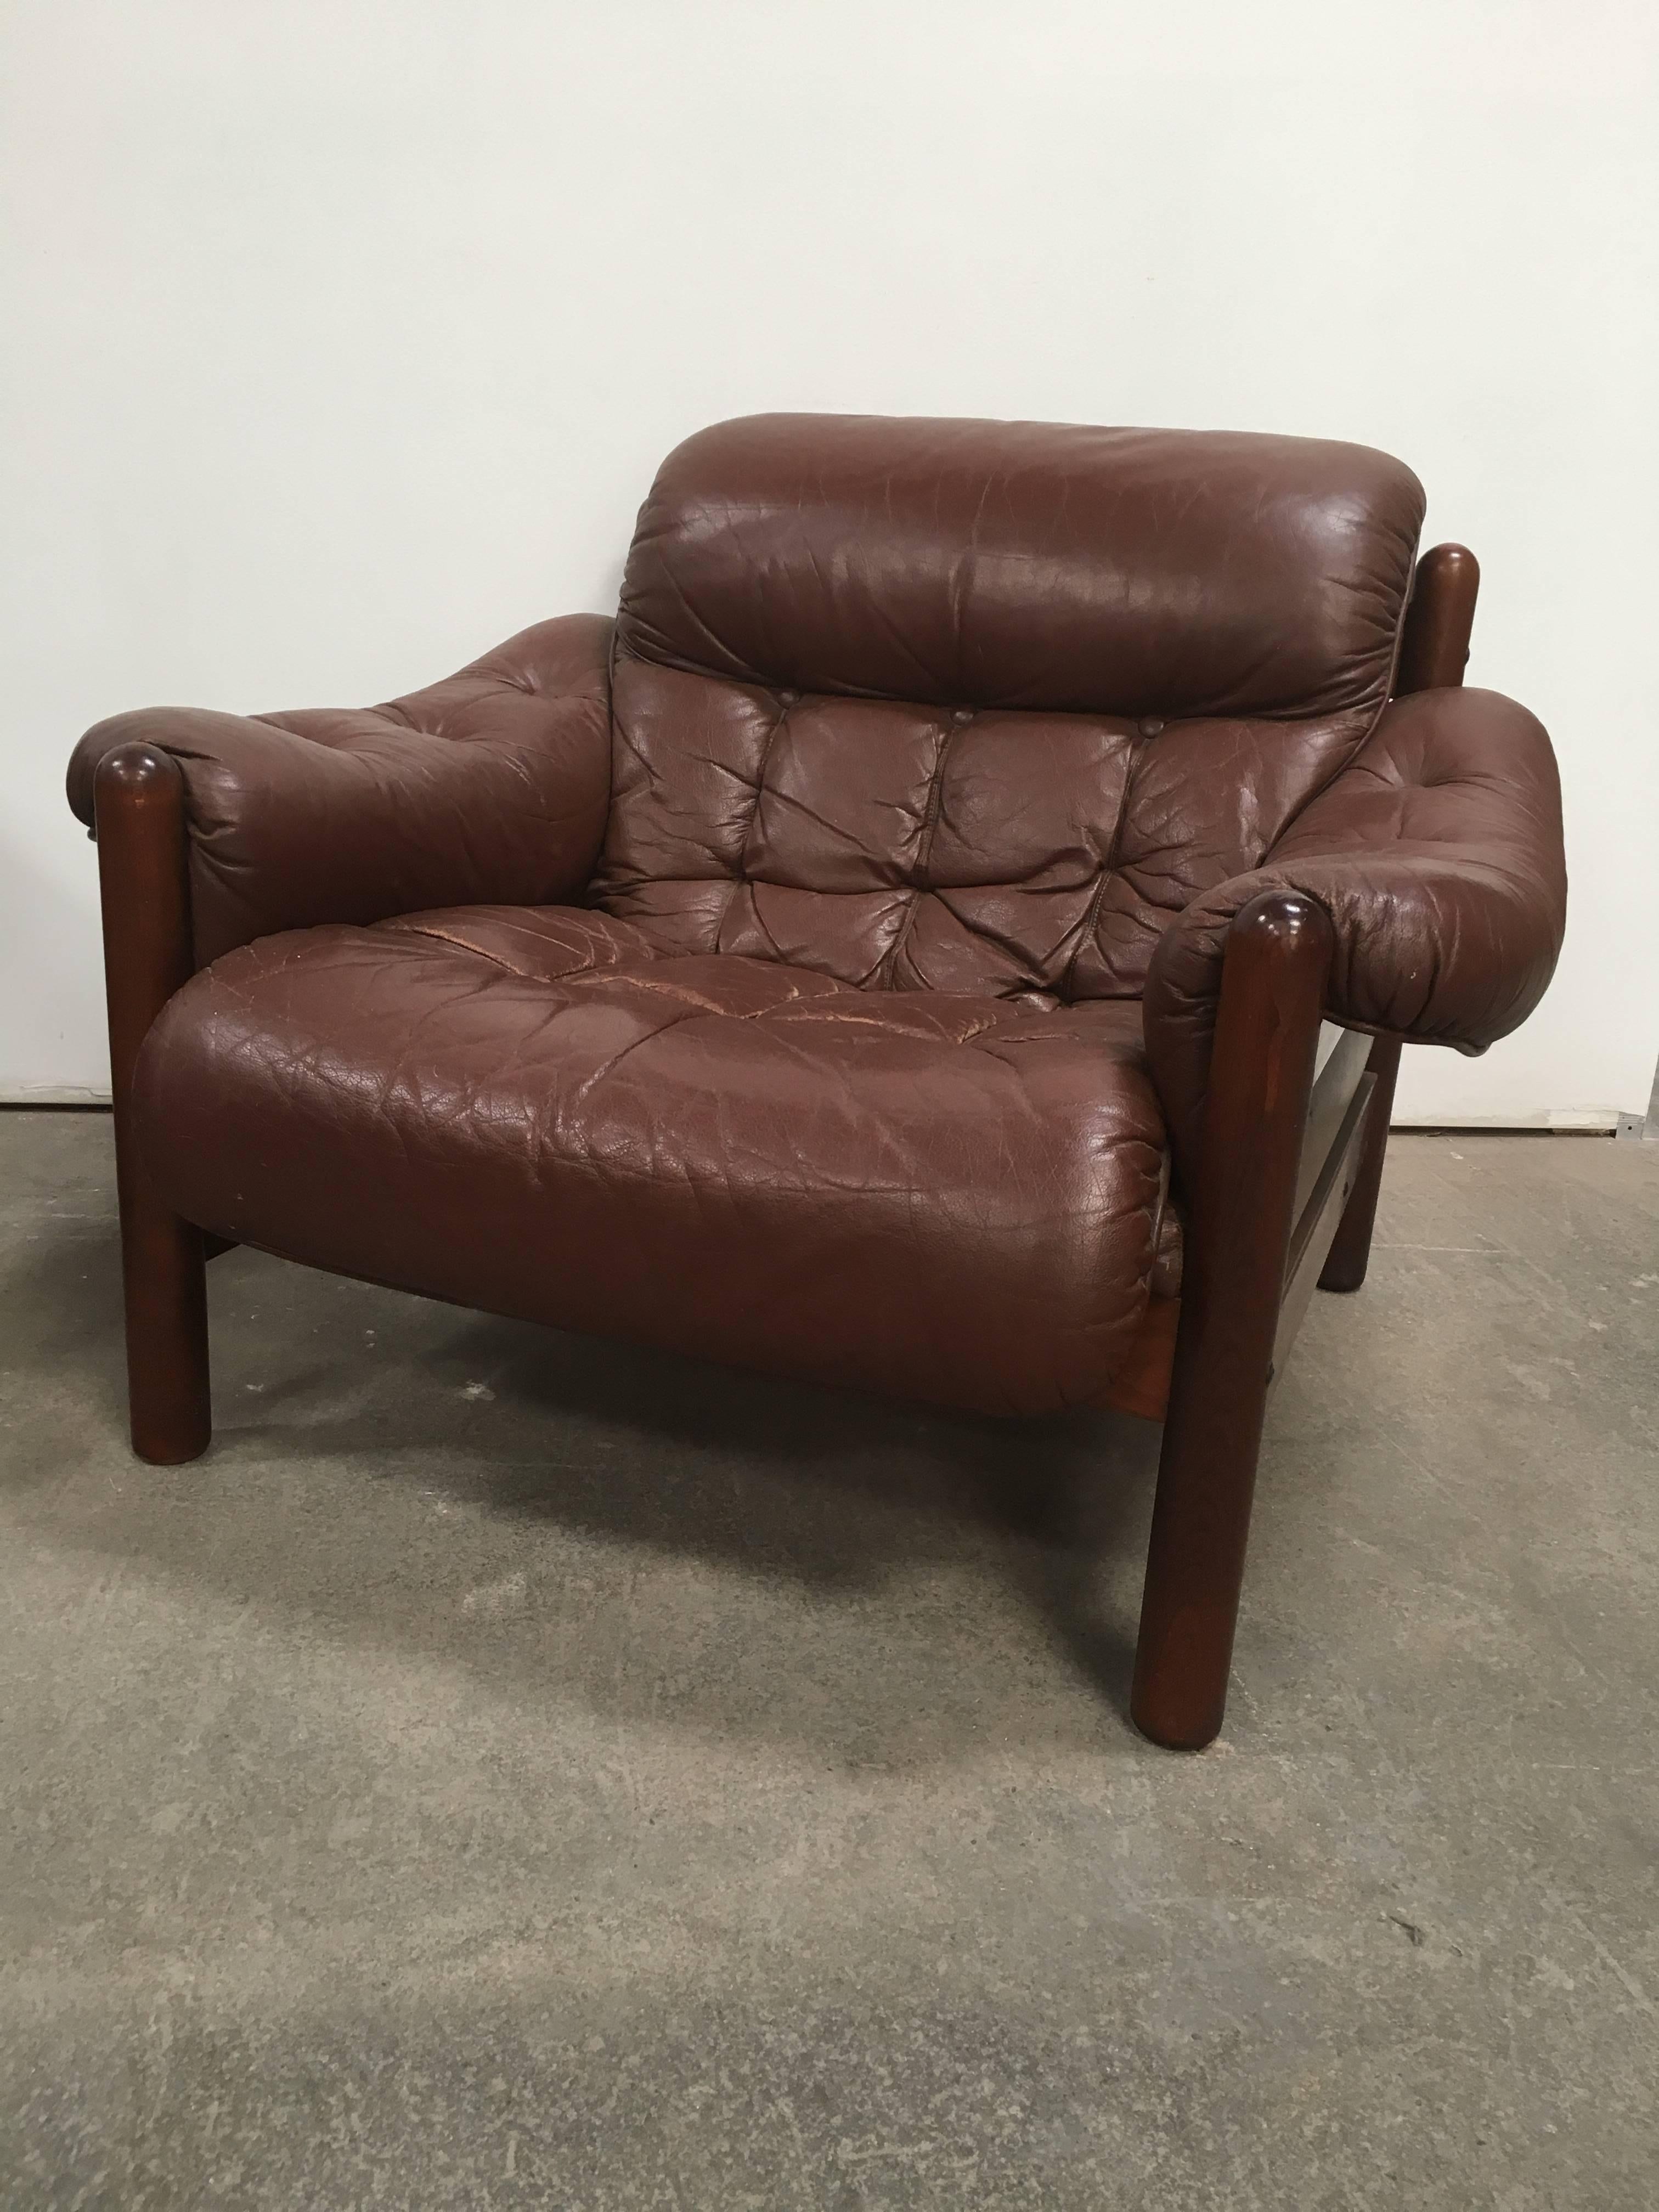 Pair of Swedish lounge chairs by Göte Möbler, circa 1960s-1970s. Comfortable button tufted cushions upholstered in beautifully aged brown leather, reminiscent of the infamous Percival Lafer style. Wood frames are in great condition.